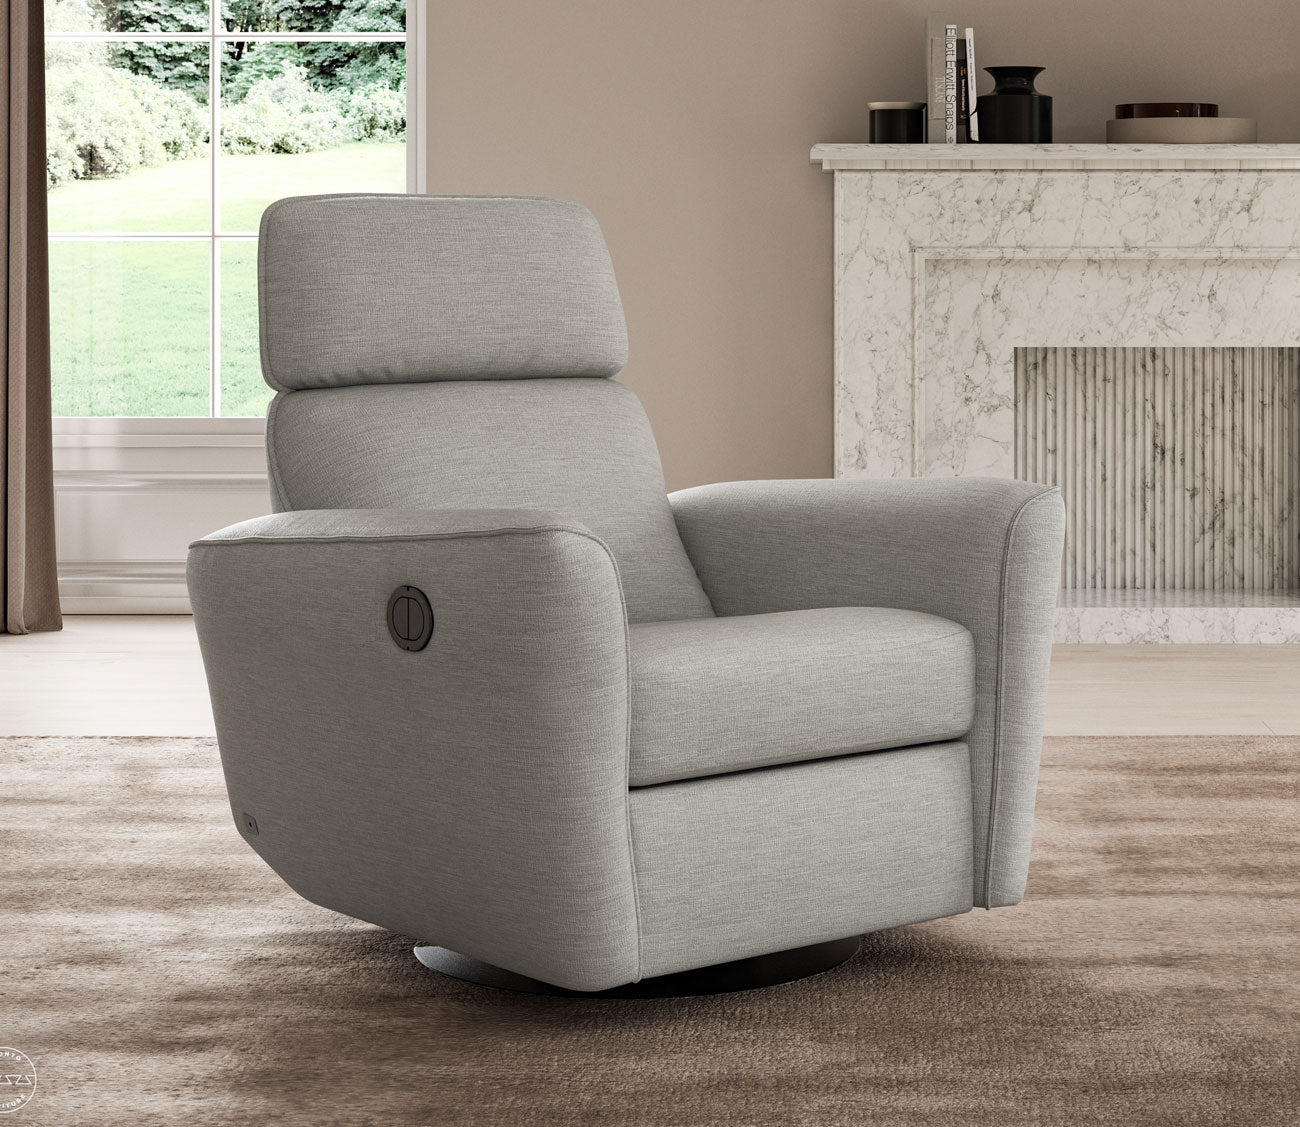 Welted Lounger Recliner Chair by Luonto